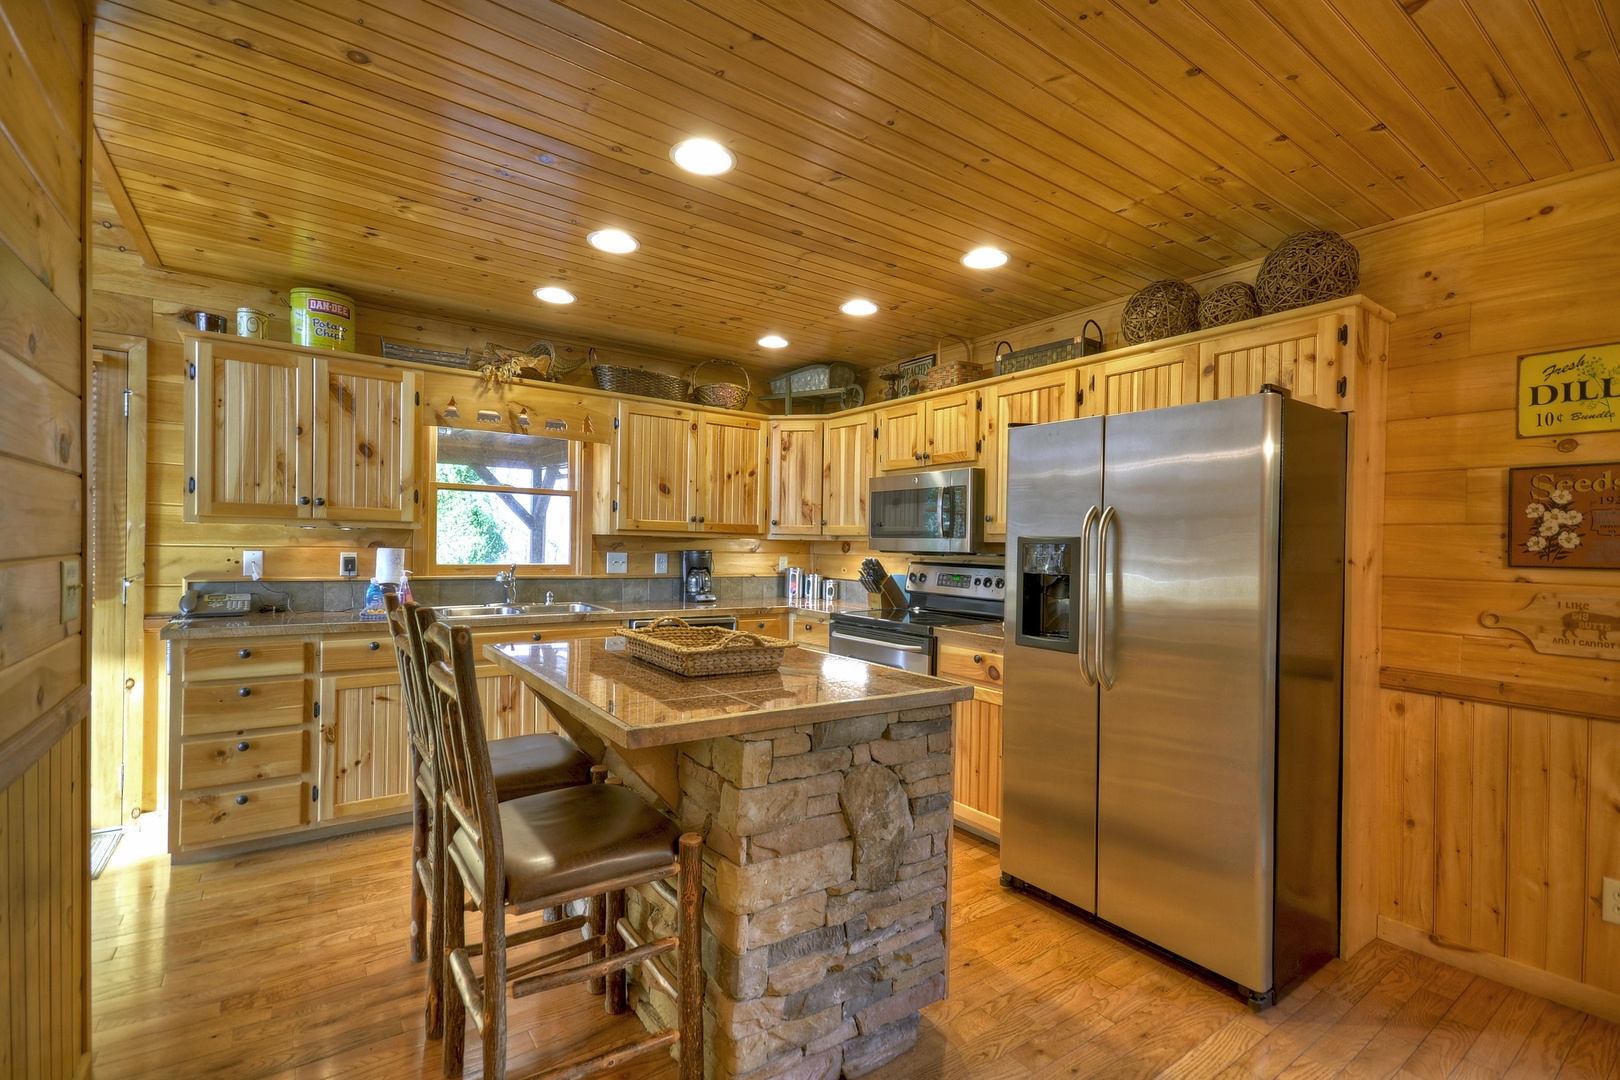 Grand Mountain Lodge-Fully equipped kitchen with an island and stools